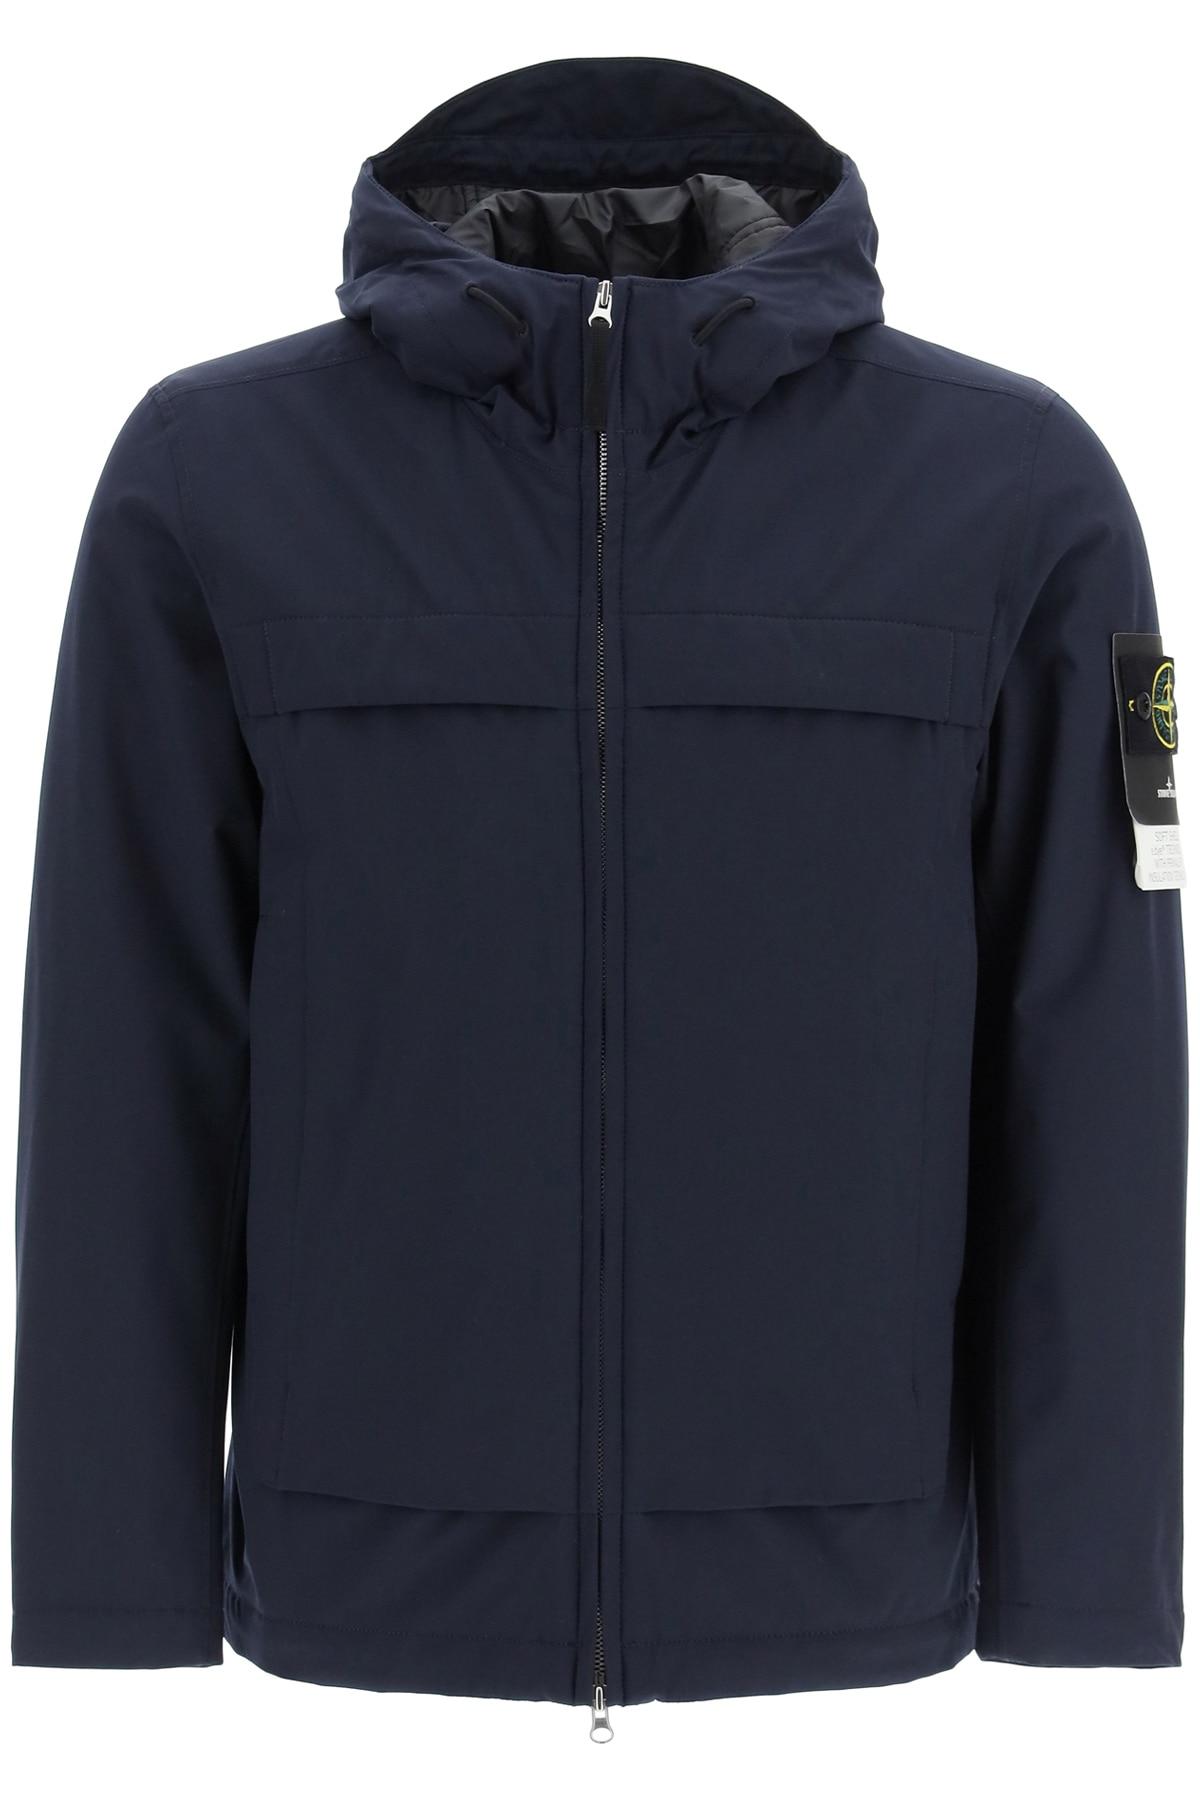 Stone Island Synthetic Soft Shell-r Jacket With E.dye Technology in Blue  for Men | Lyst